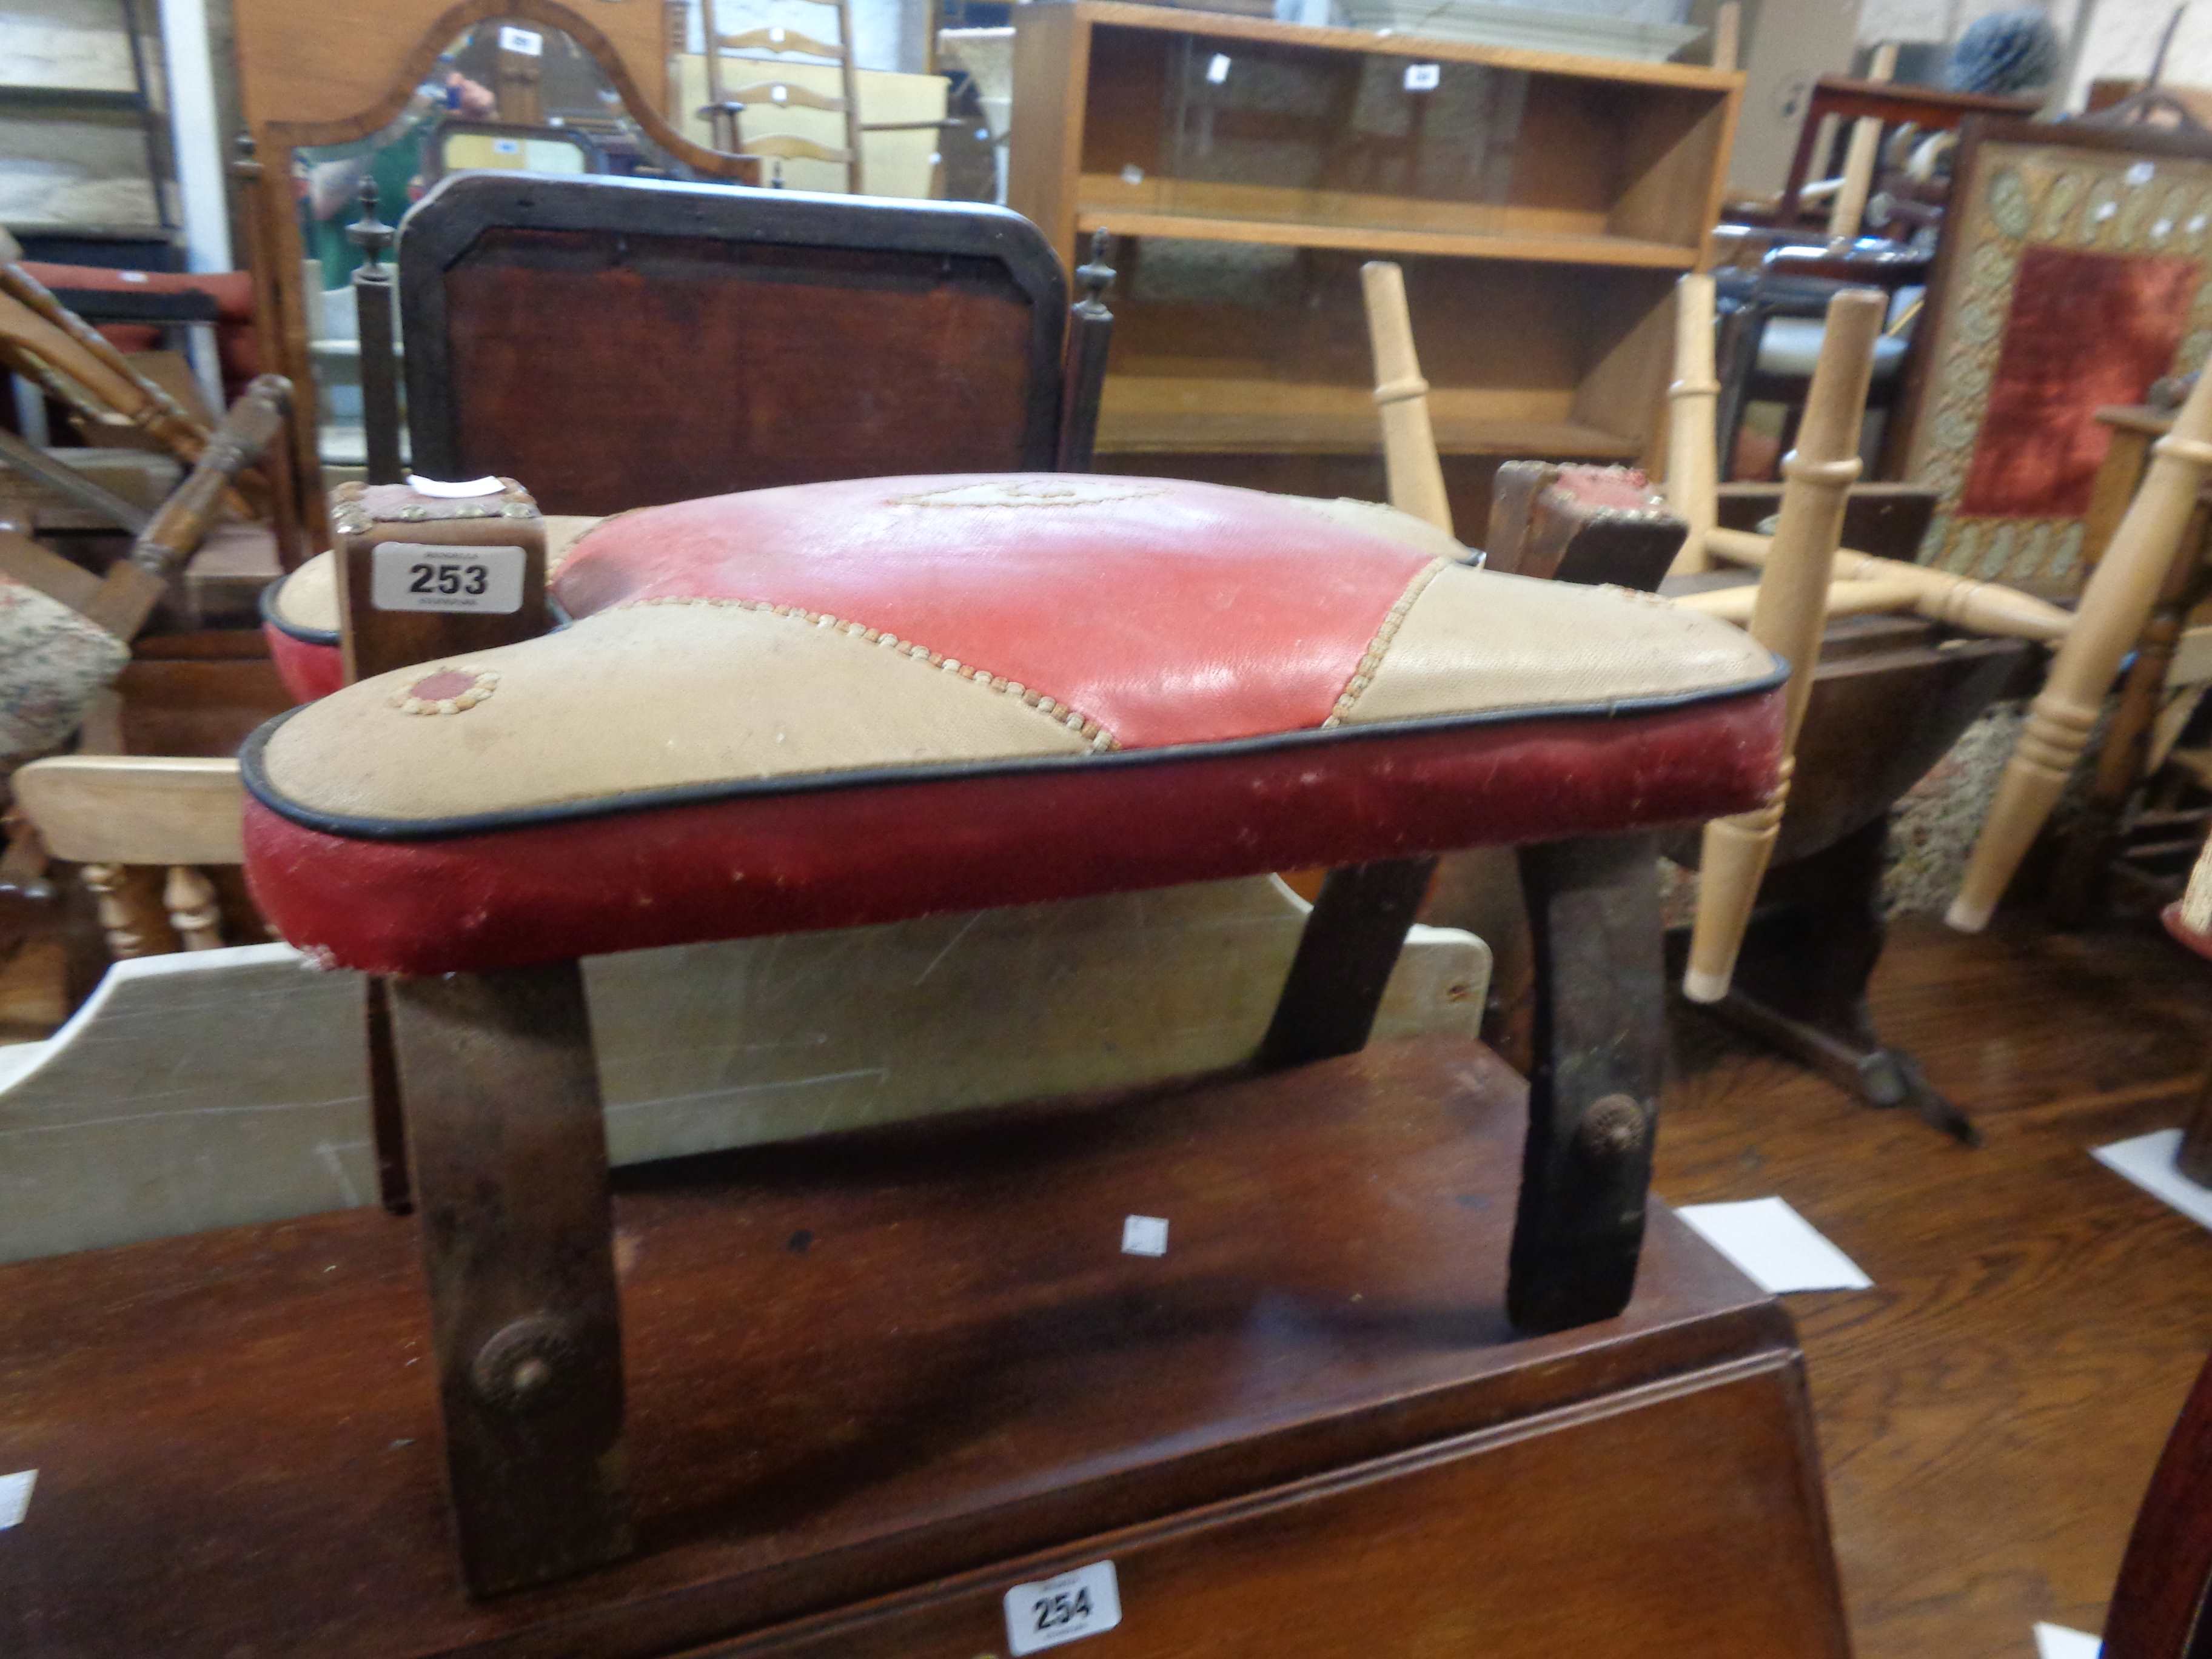 Two similar vintage camel saddle stools, both with leather upholstered seats - various condition